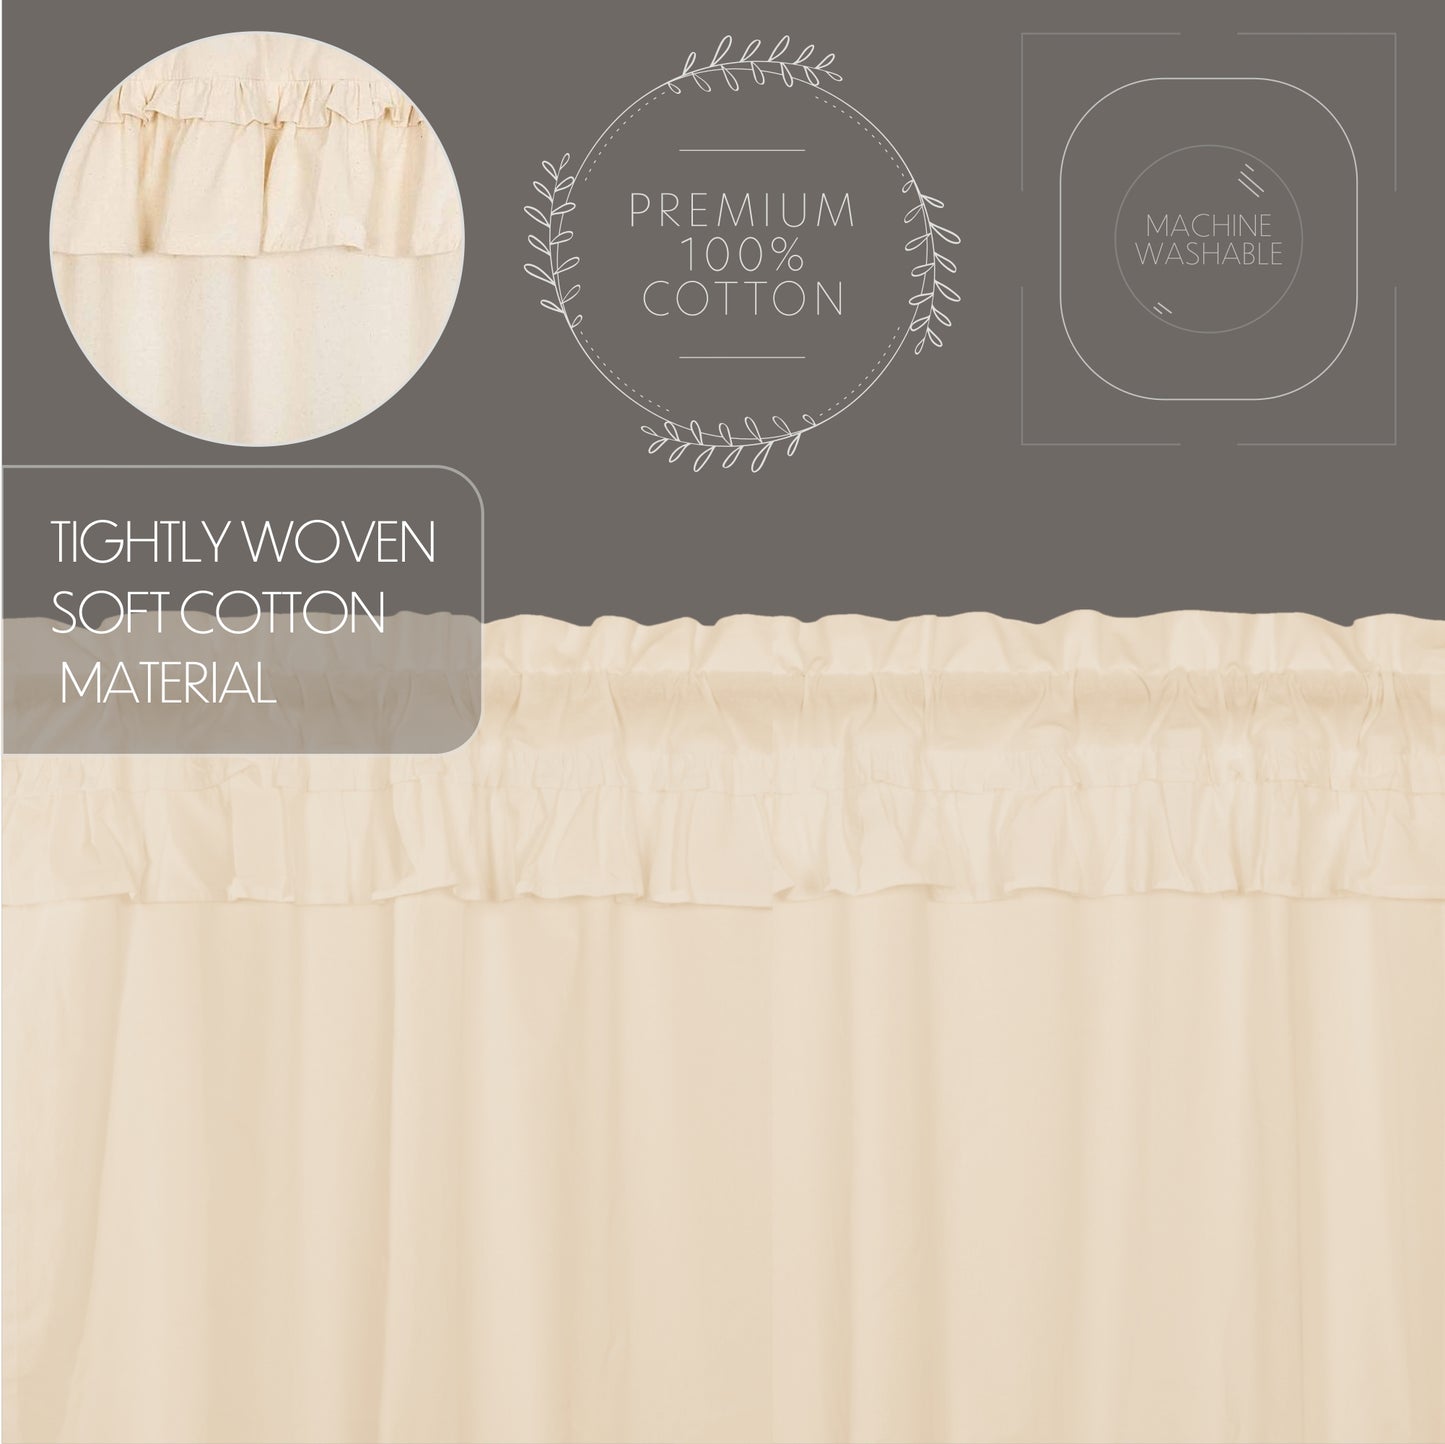 51990-Muslin-Ruffled-Unbleached-Natural-Tier-Set-of-2-L36xW36-image-3